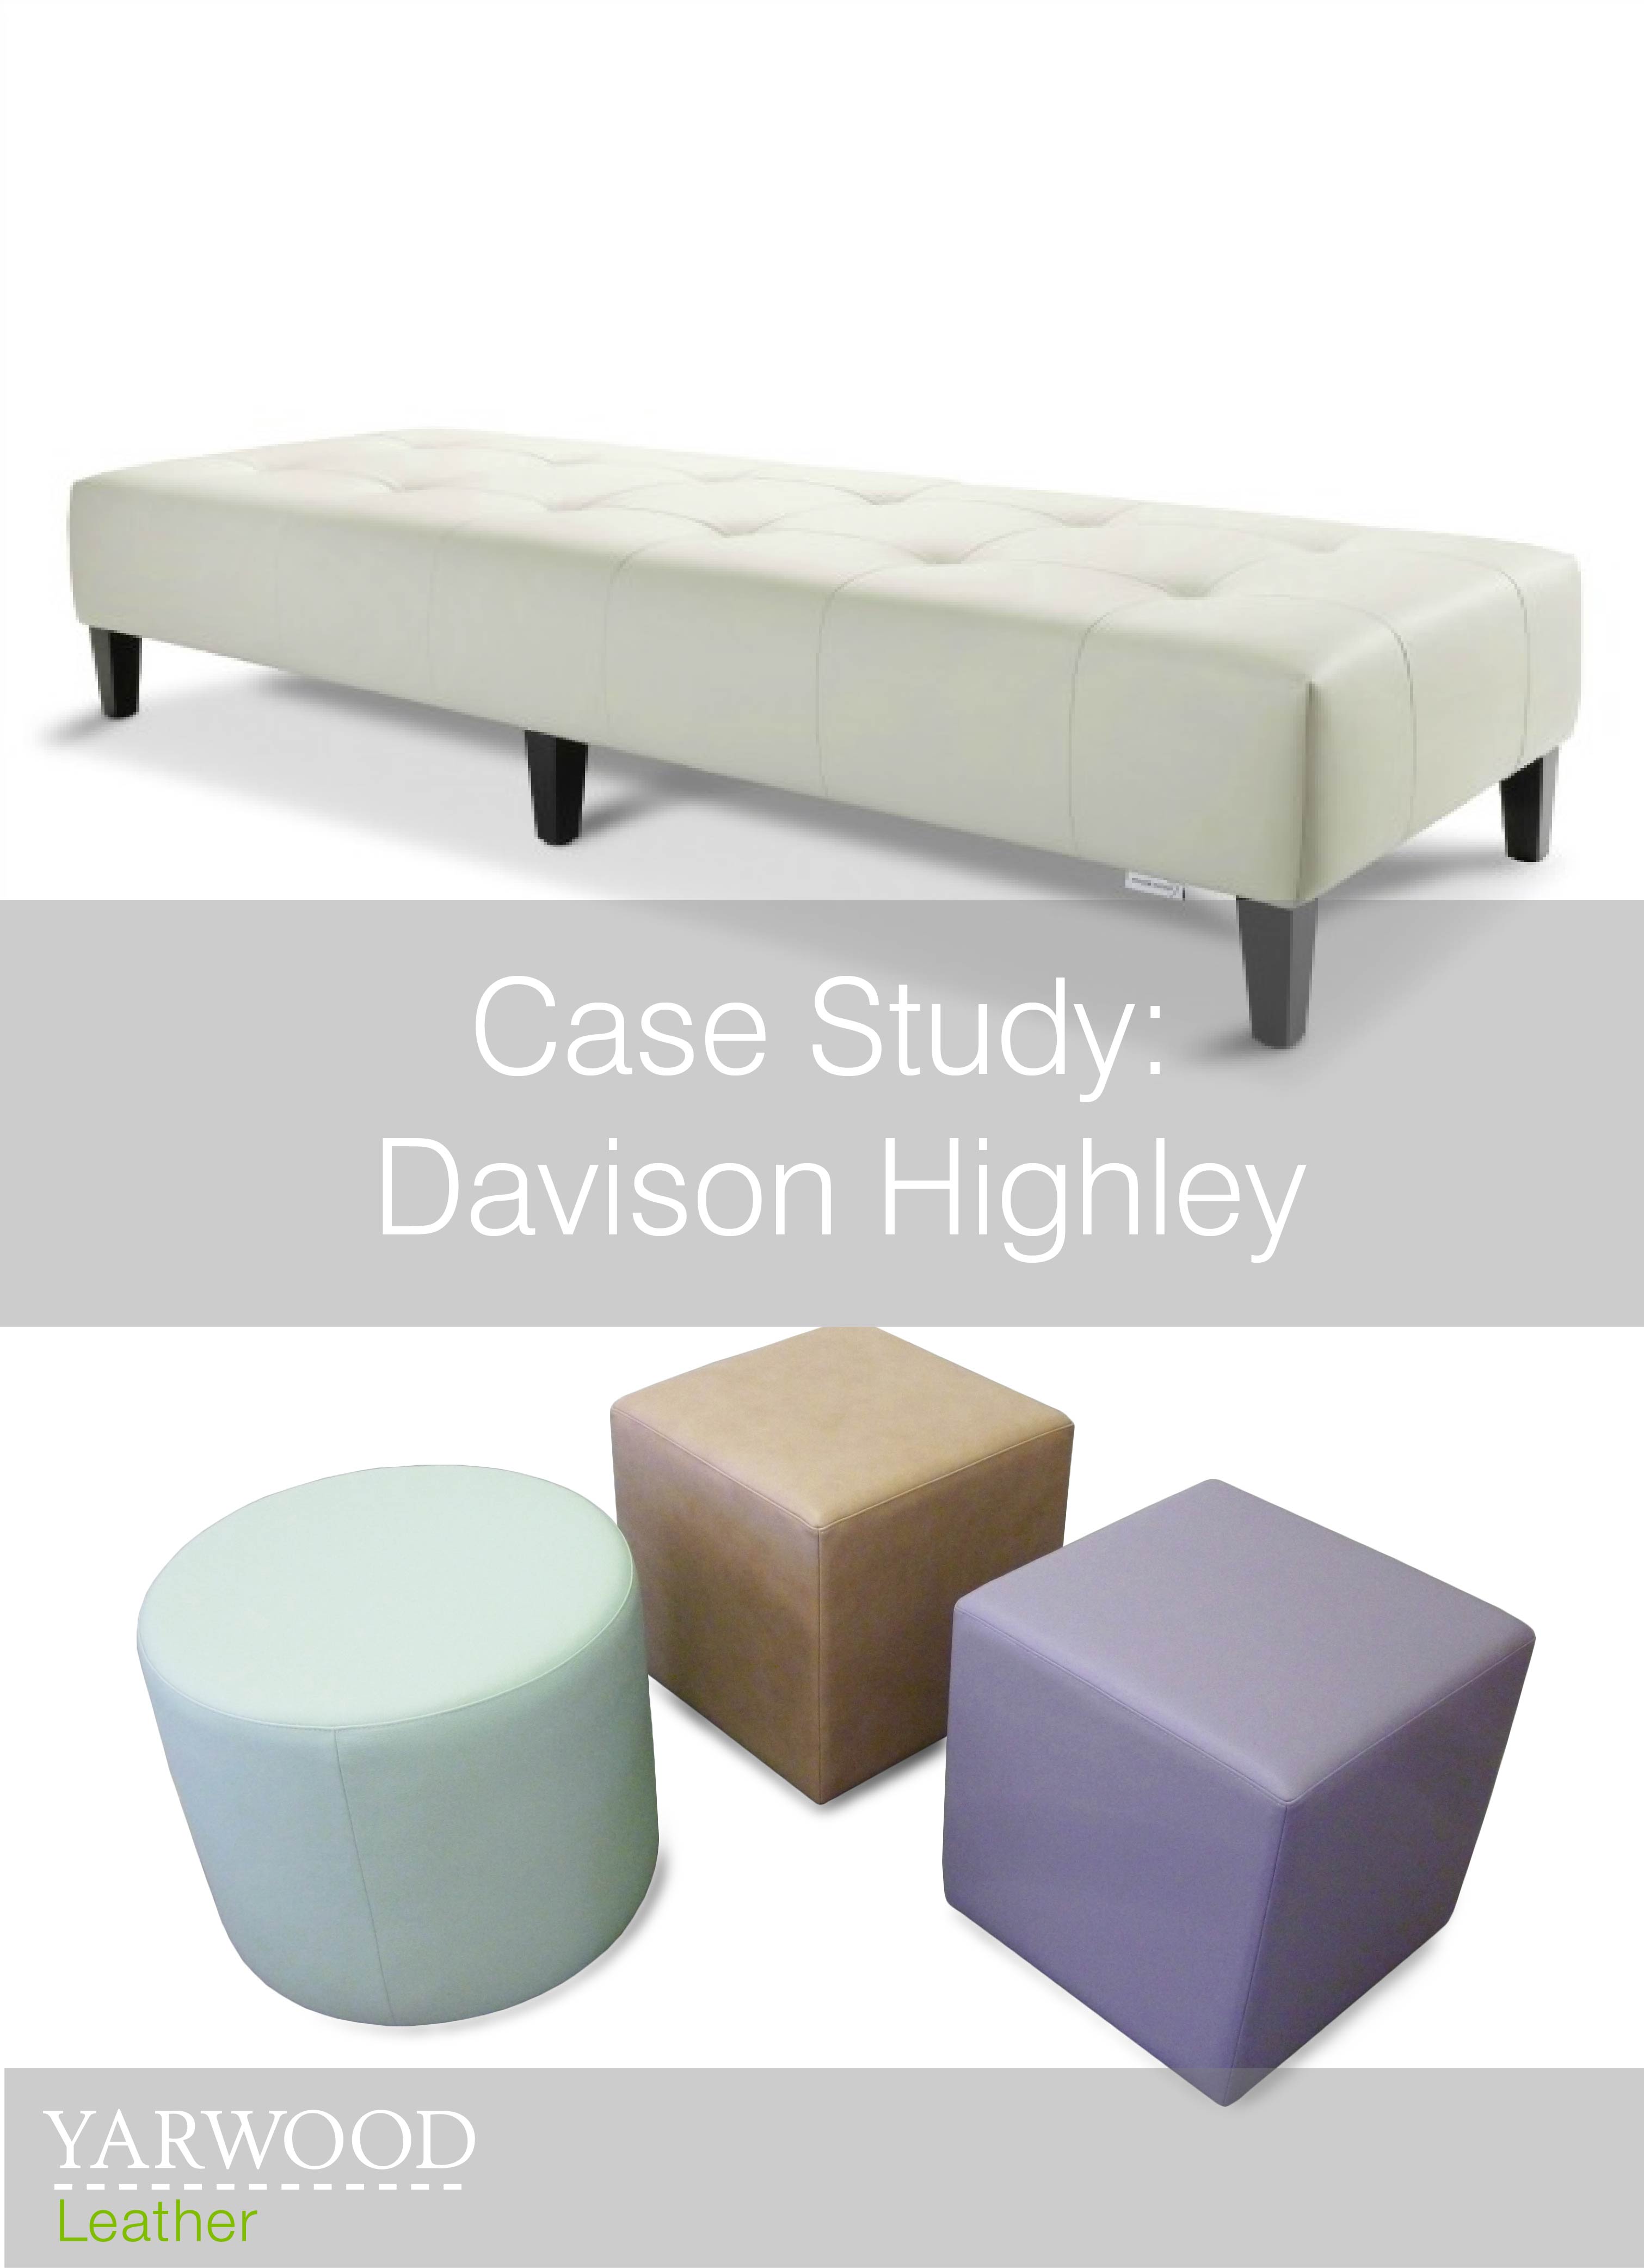 Soft seating for the office, upholstered in a variety of leathers, read about our work with Davison Highley